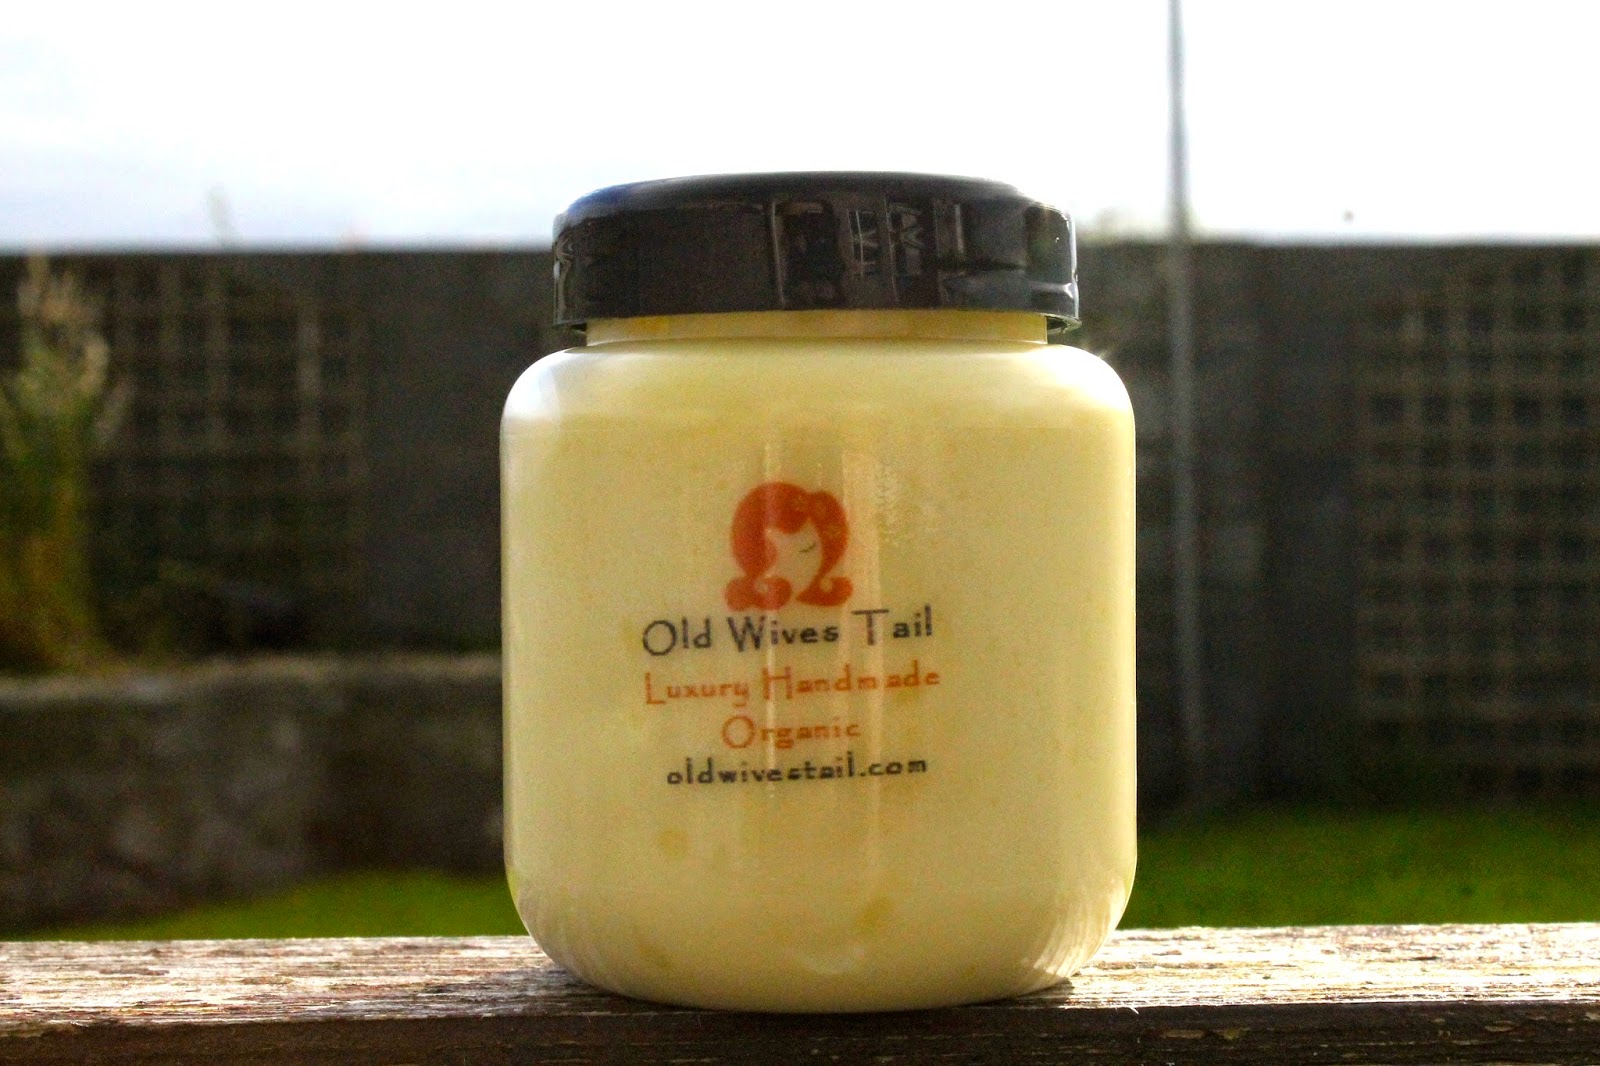 Old wives Tail Organic hair oil